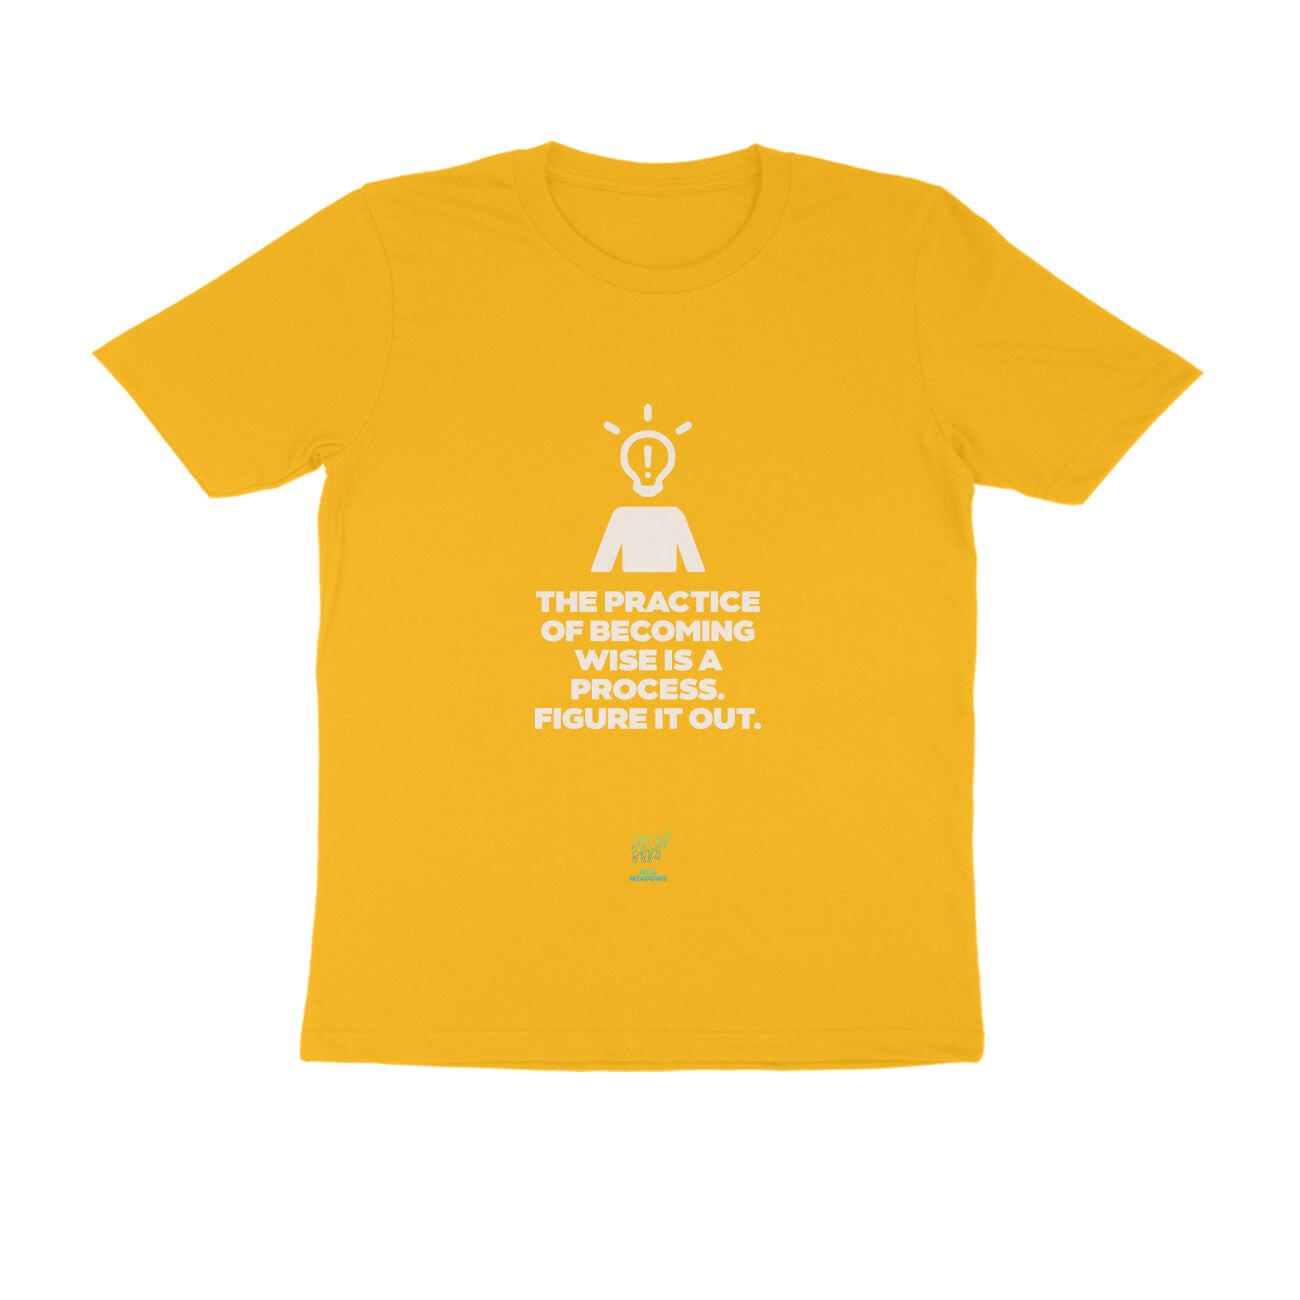 Gospel ( The practice of becoming wise is a process.)-Unisex Tees